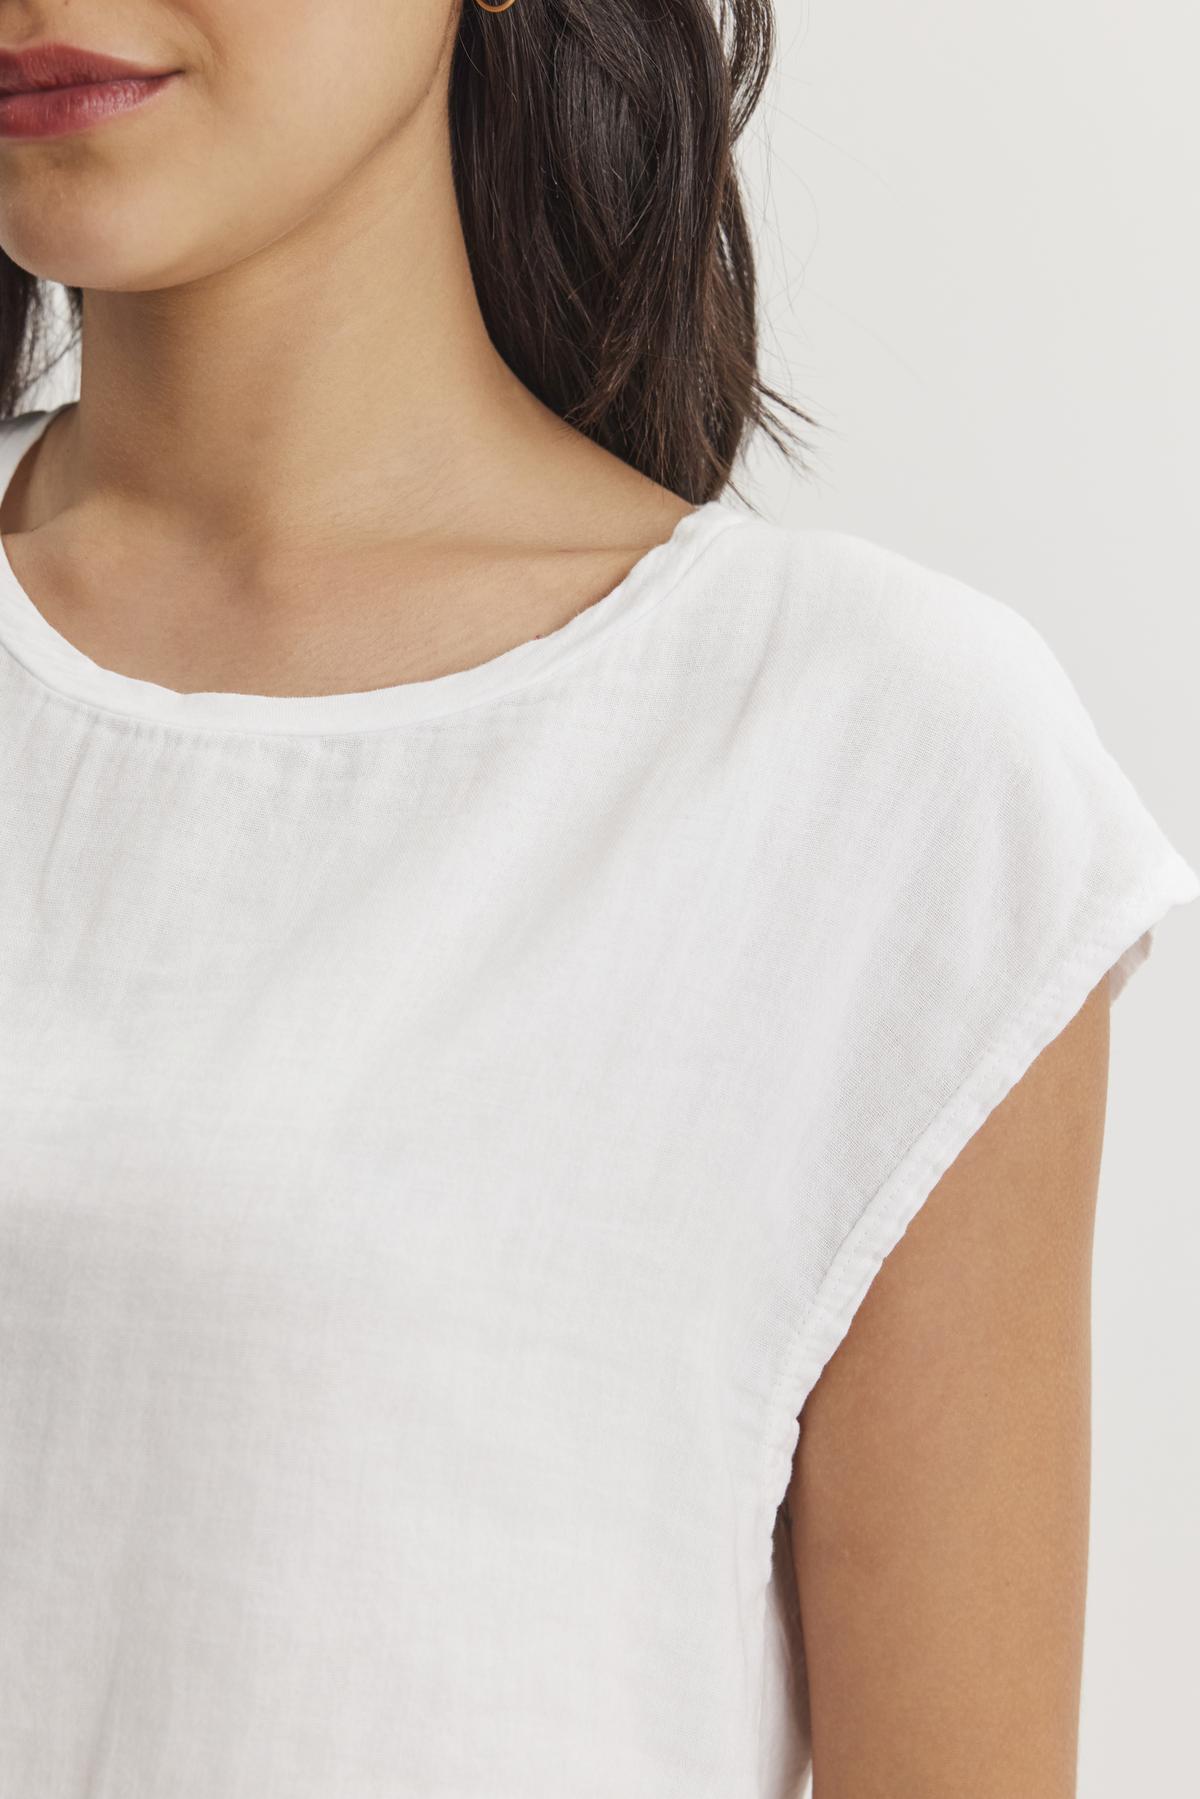   A close-up of a person wearing a white DANIELLA CREW NECK TEE from Velvet by Graham & Spencer made from lightweight cotton woven fabric. Only the lower half of their face and upper torso are visible, offering a casual basic look in a cropped silhouette. 